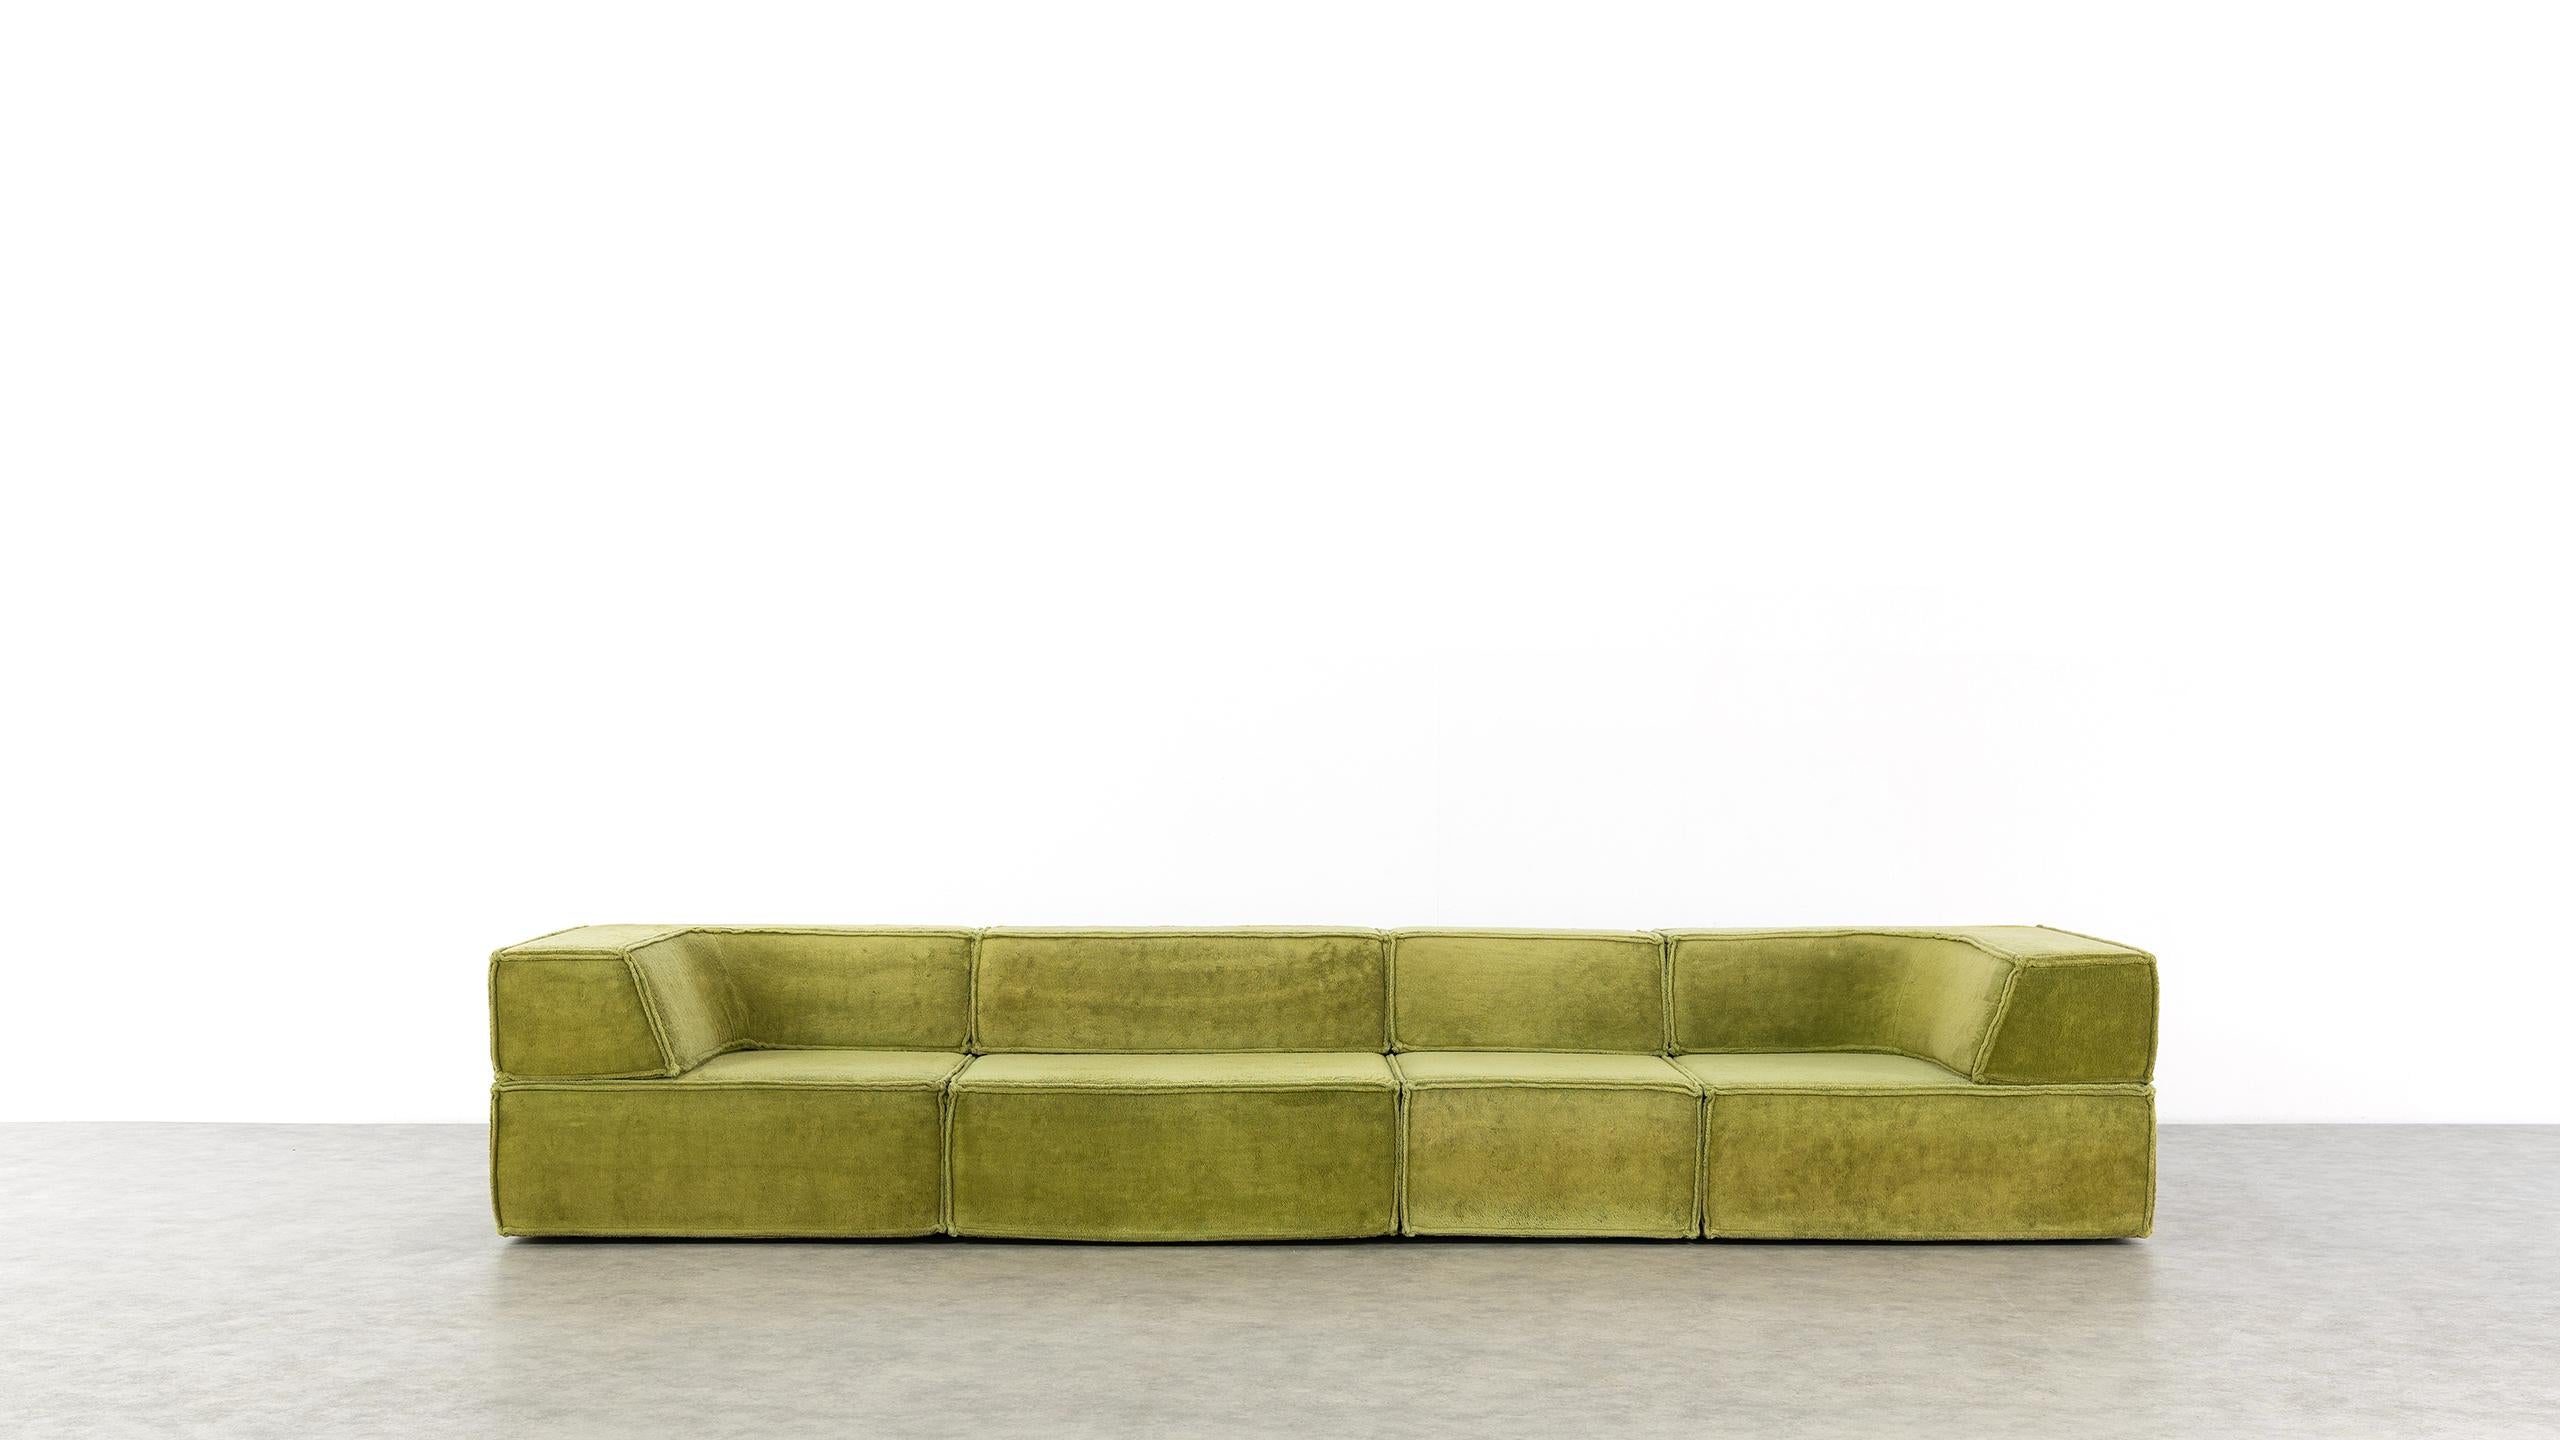 COR Trio Modular Sofa, Giant Landscape in Green, 1972 by Team Form Ag, Swiss 7